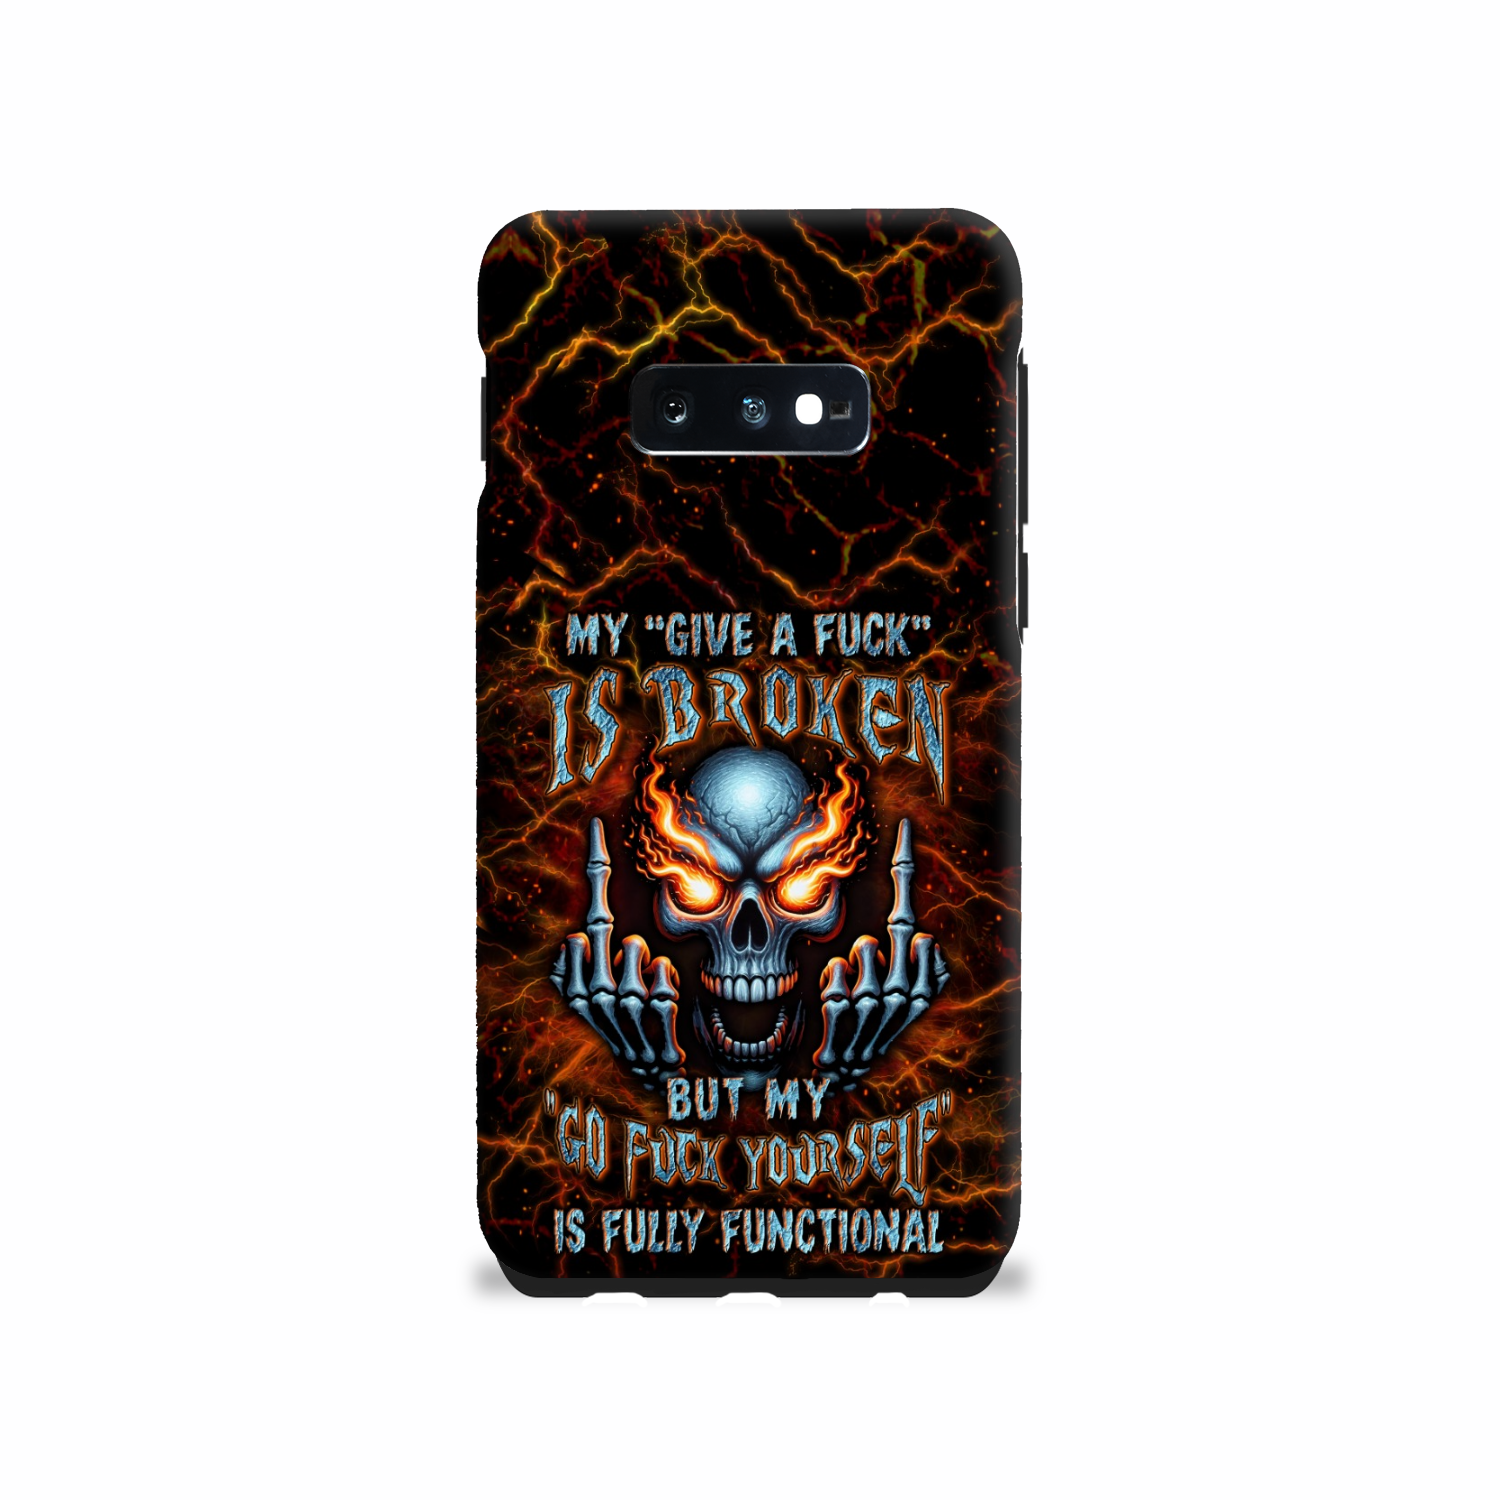 MY GIVE A F IS BROKEN PHONE CASE - YHLN0803242